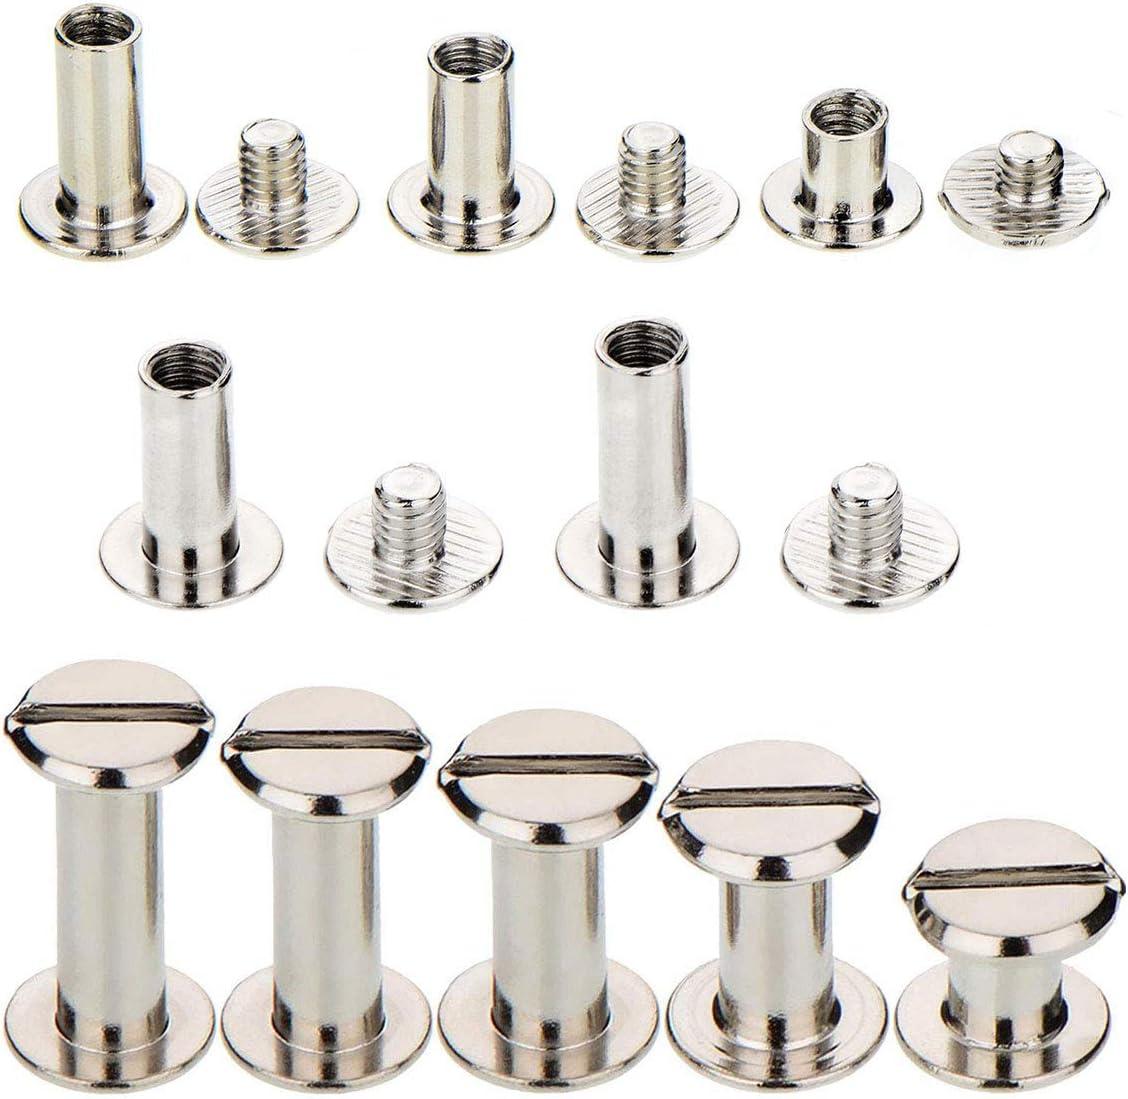 Chicago Screw Posts 3/8 Heavy Duty Nickel Plated Leathercraft Hardware  Fastener - 100 Pack 